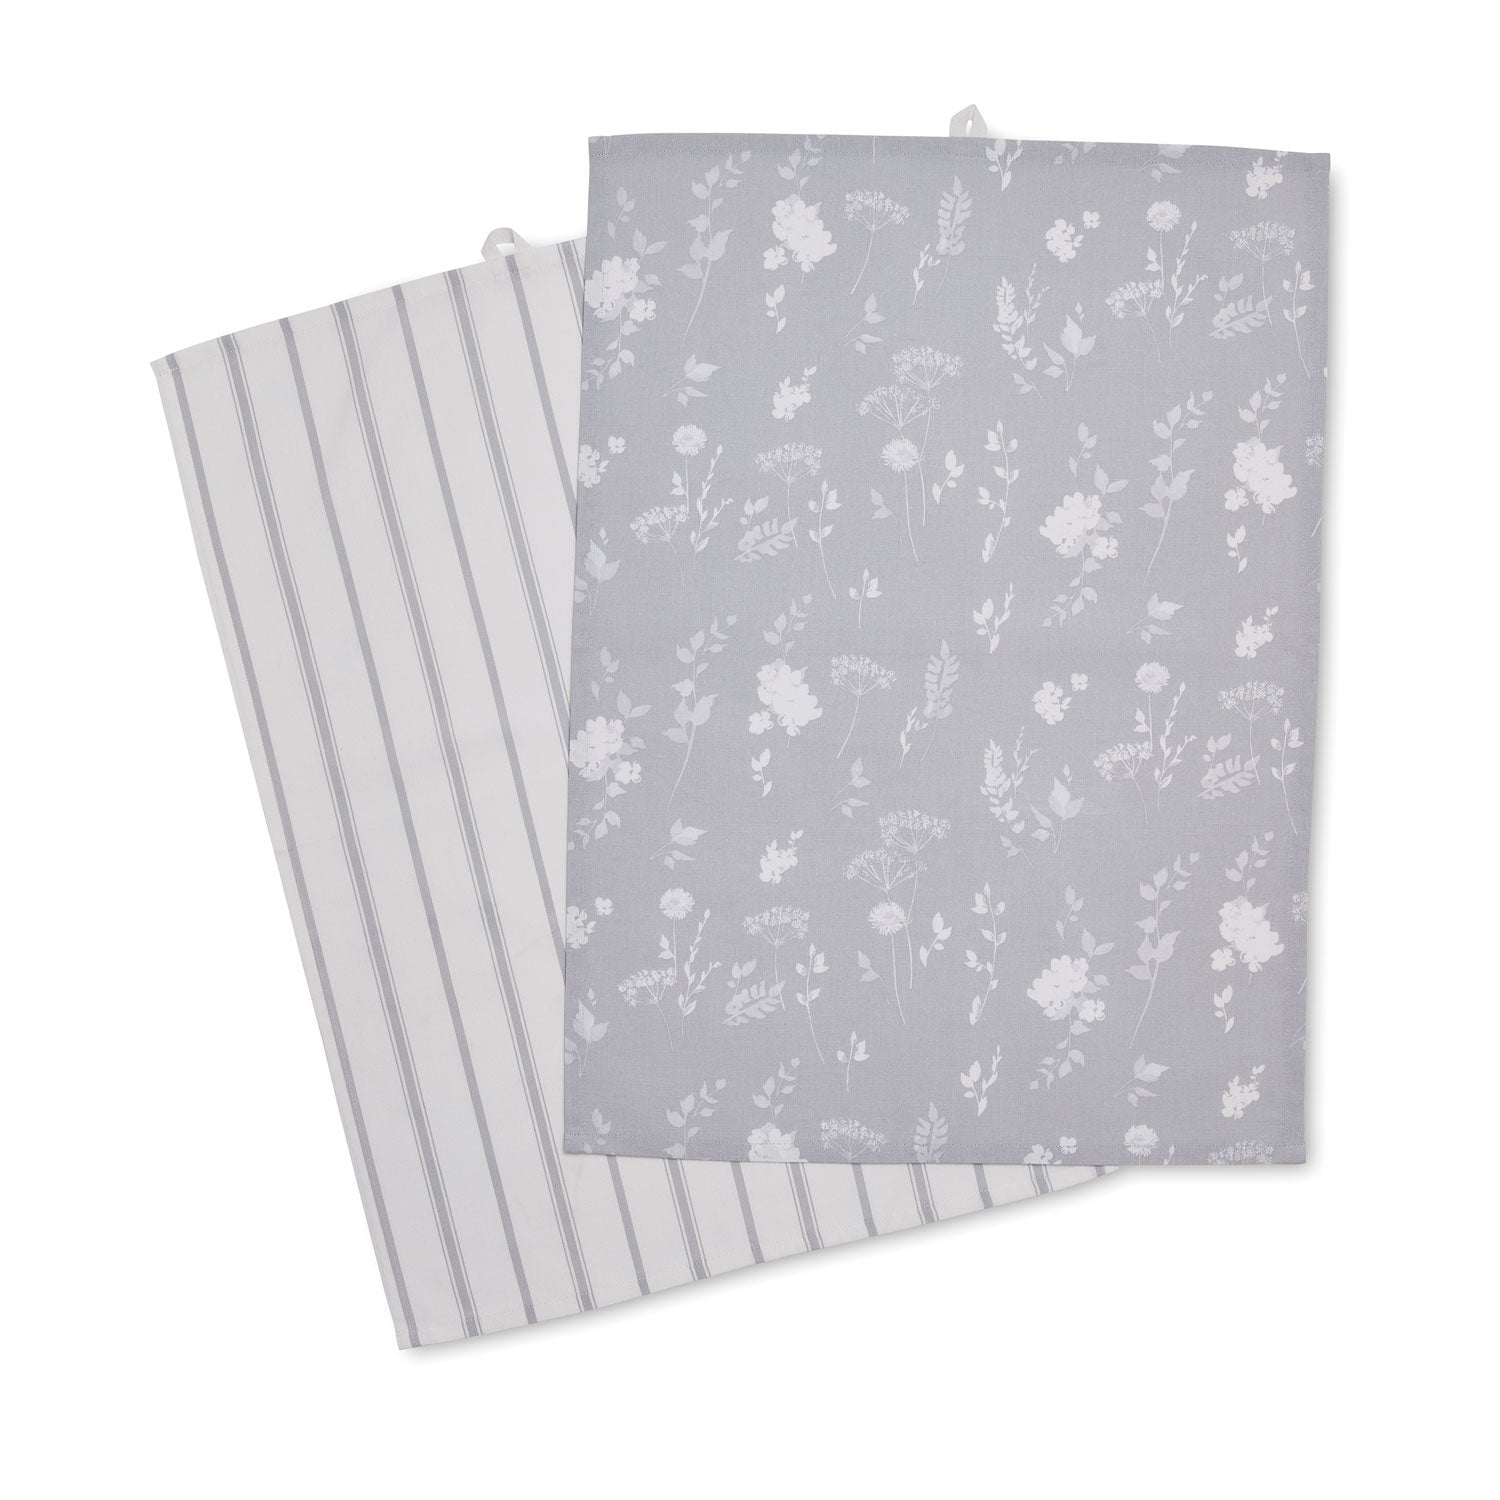 Catherine Lansfield Dining Meadowsweet Floral Tea Towels Pair - White / Grey 1 Shaws Department Stores